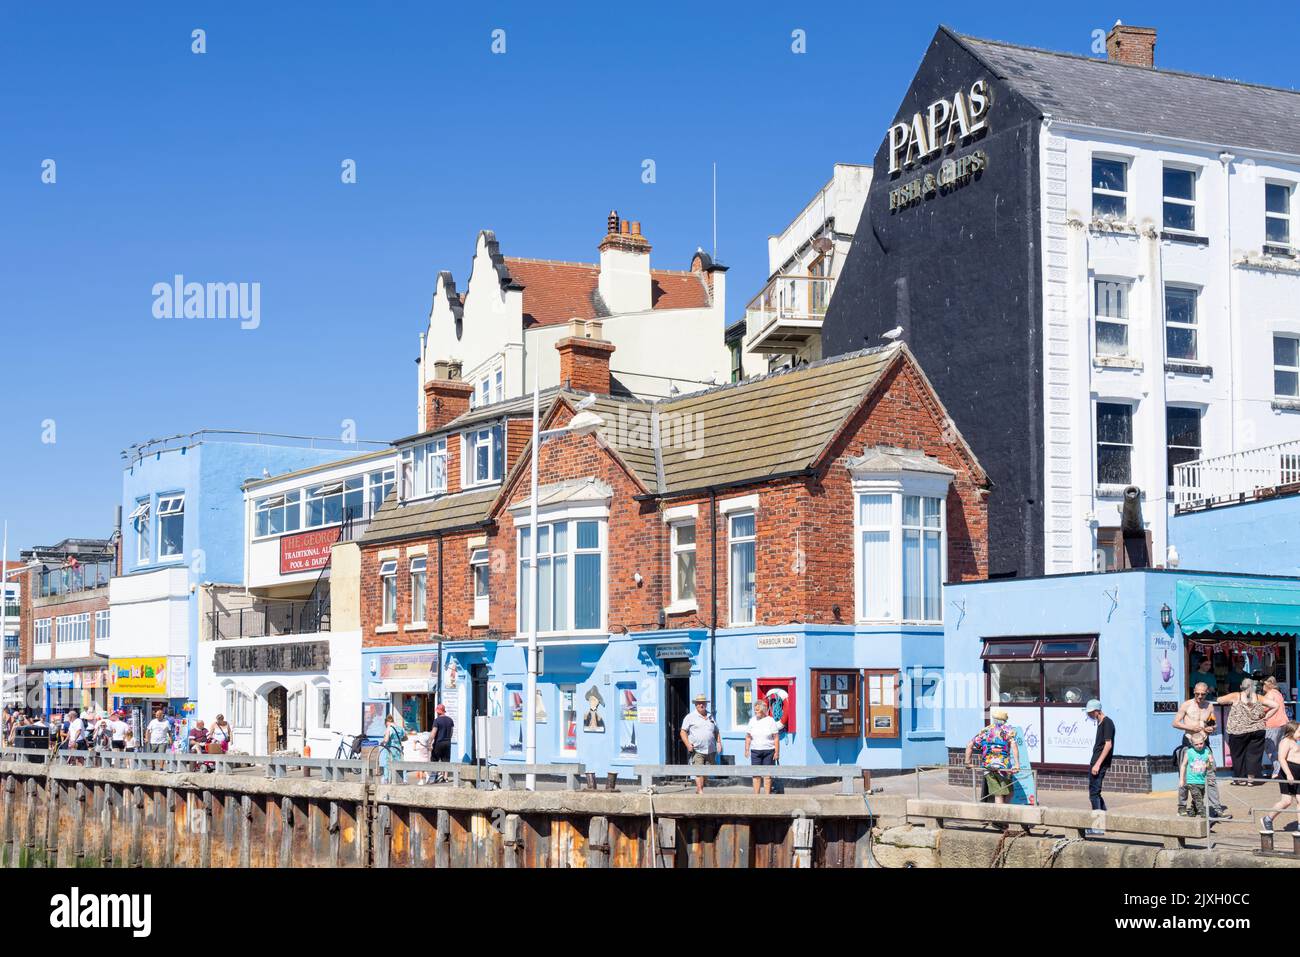 Bridlington Harbour Wall mit Papa's Fish and Chips Restaurant Bridlington East Riding of Yorkshire England GB Europa Stockfoto